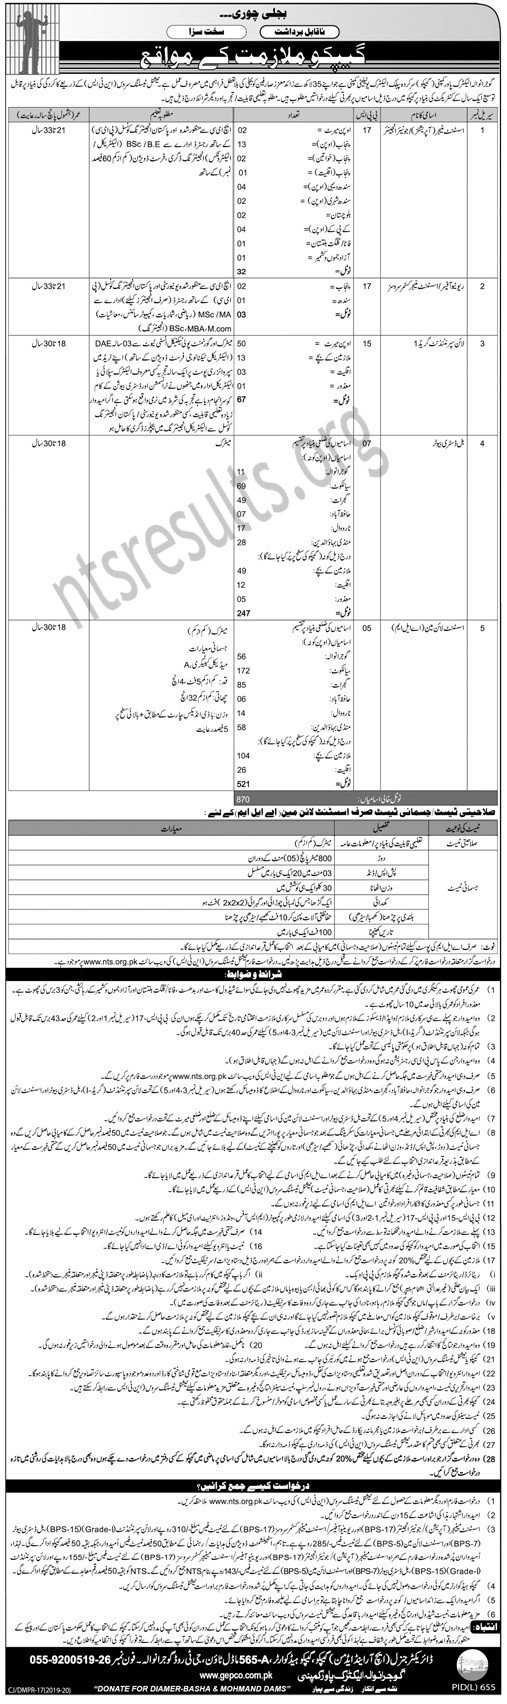 Gujranwala Electric Power Company GEPCO Jobs NTS Test Roll No Slip